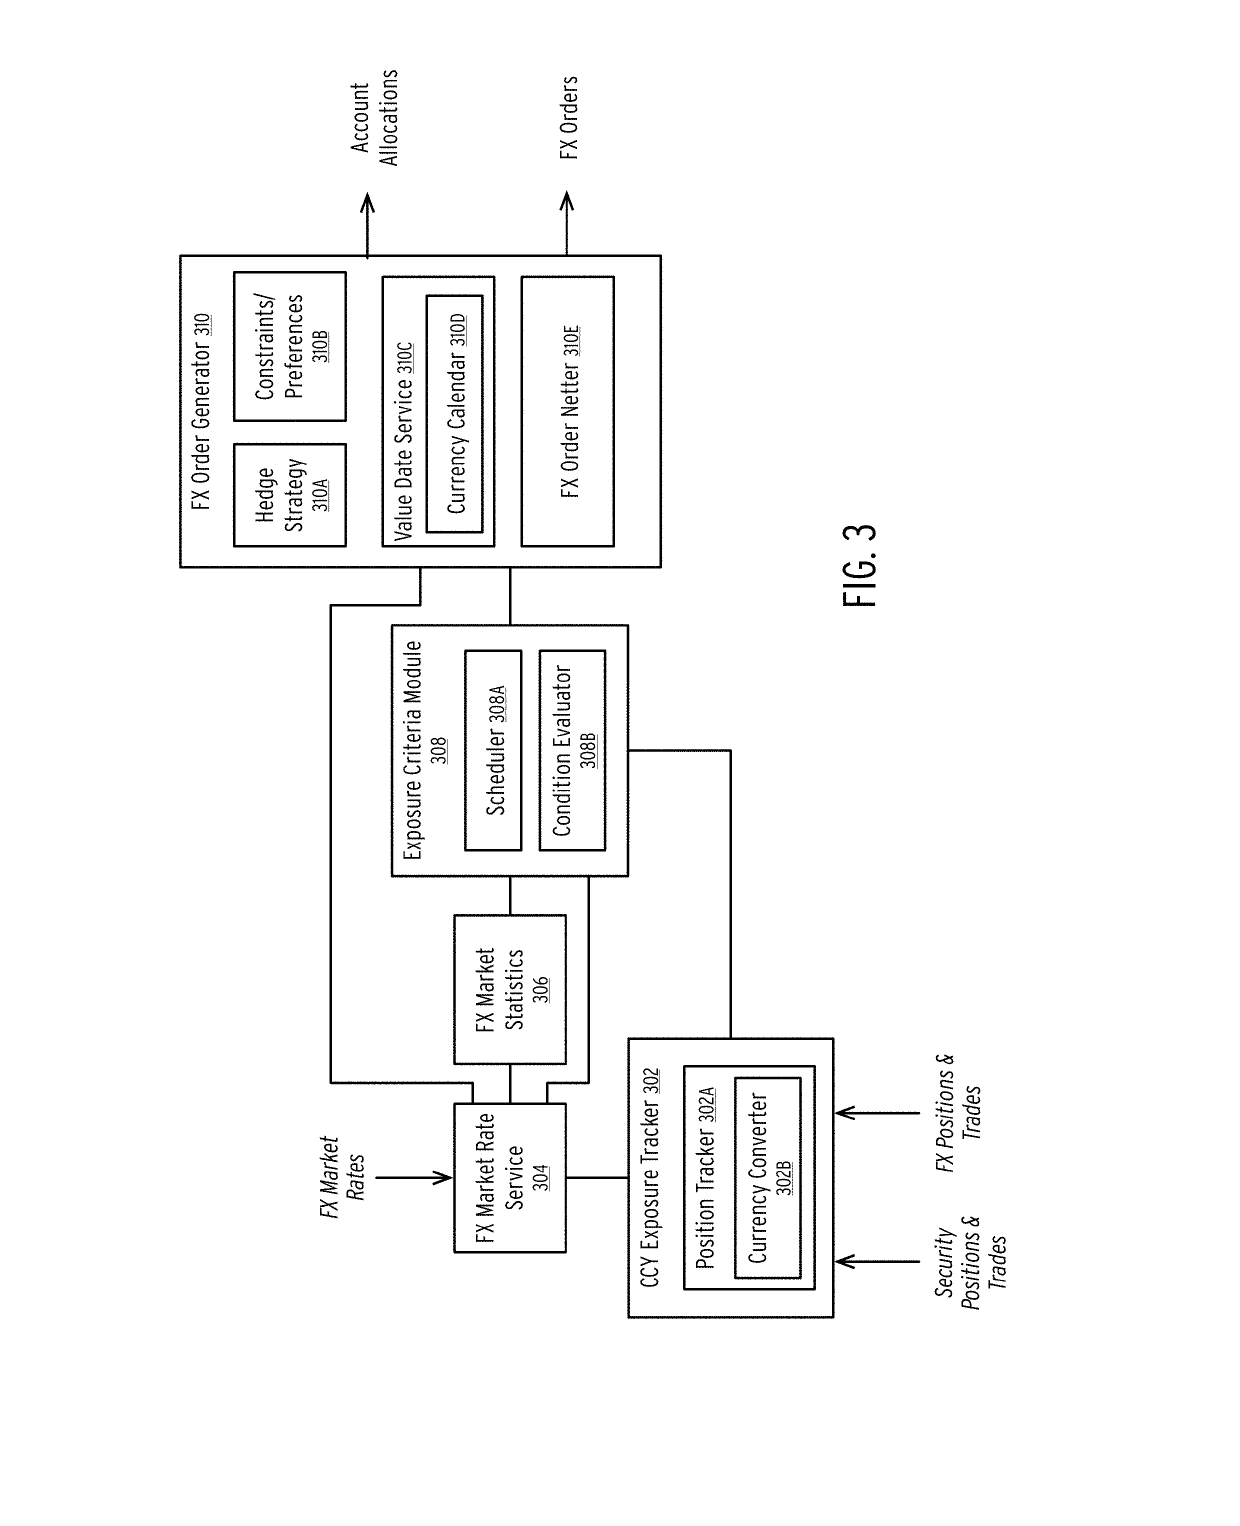 Systems and methods for optimizing network transaction throughput using batched transaction netting